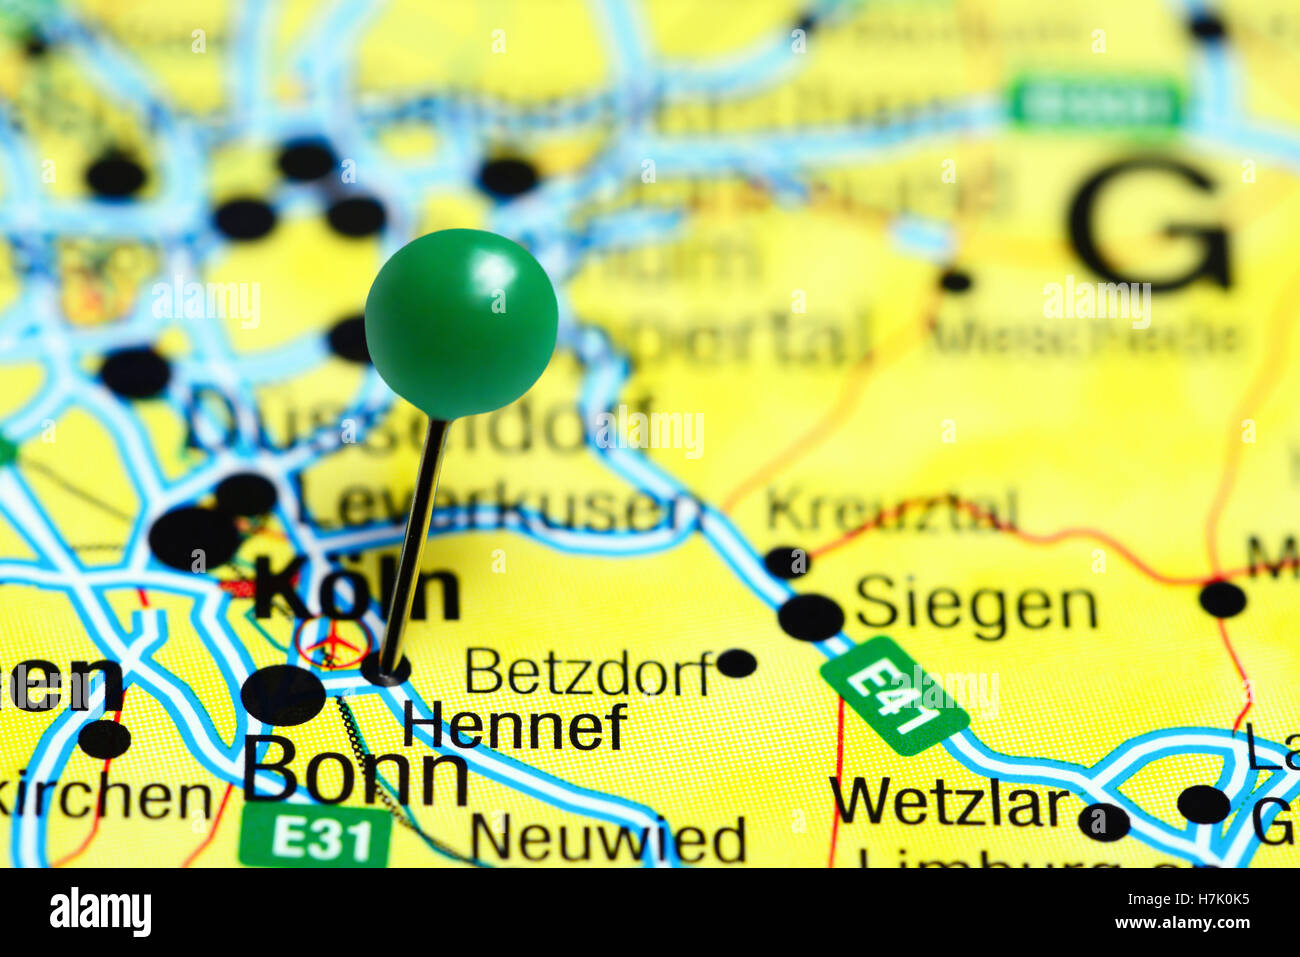 Hennef Pinned On A Map Of Germany Stock Photo Alamy